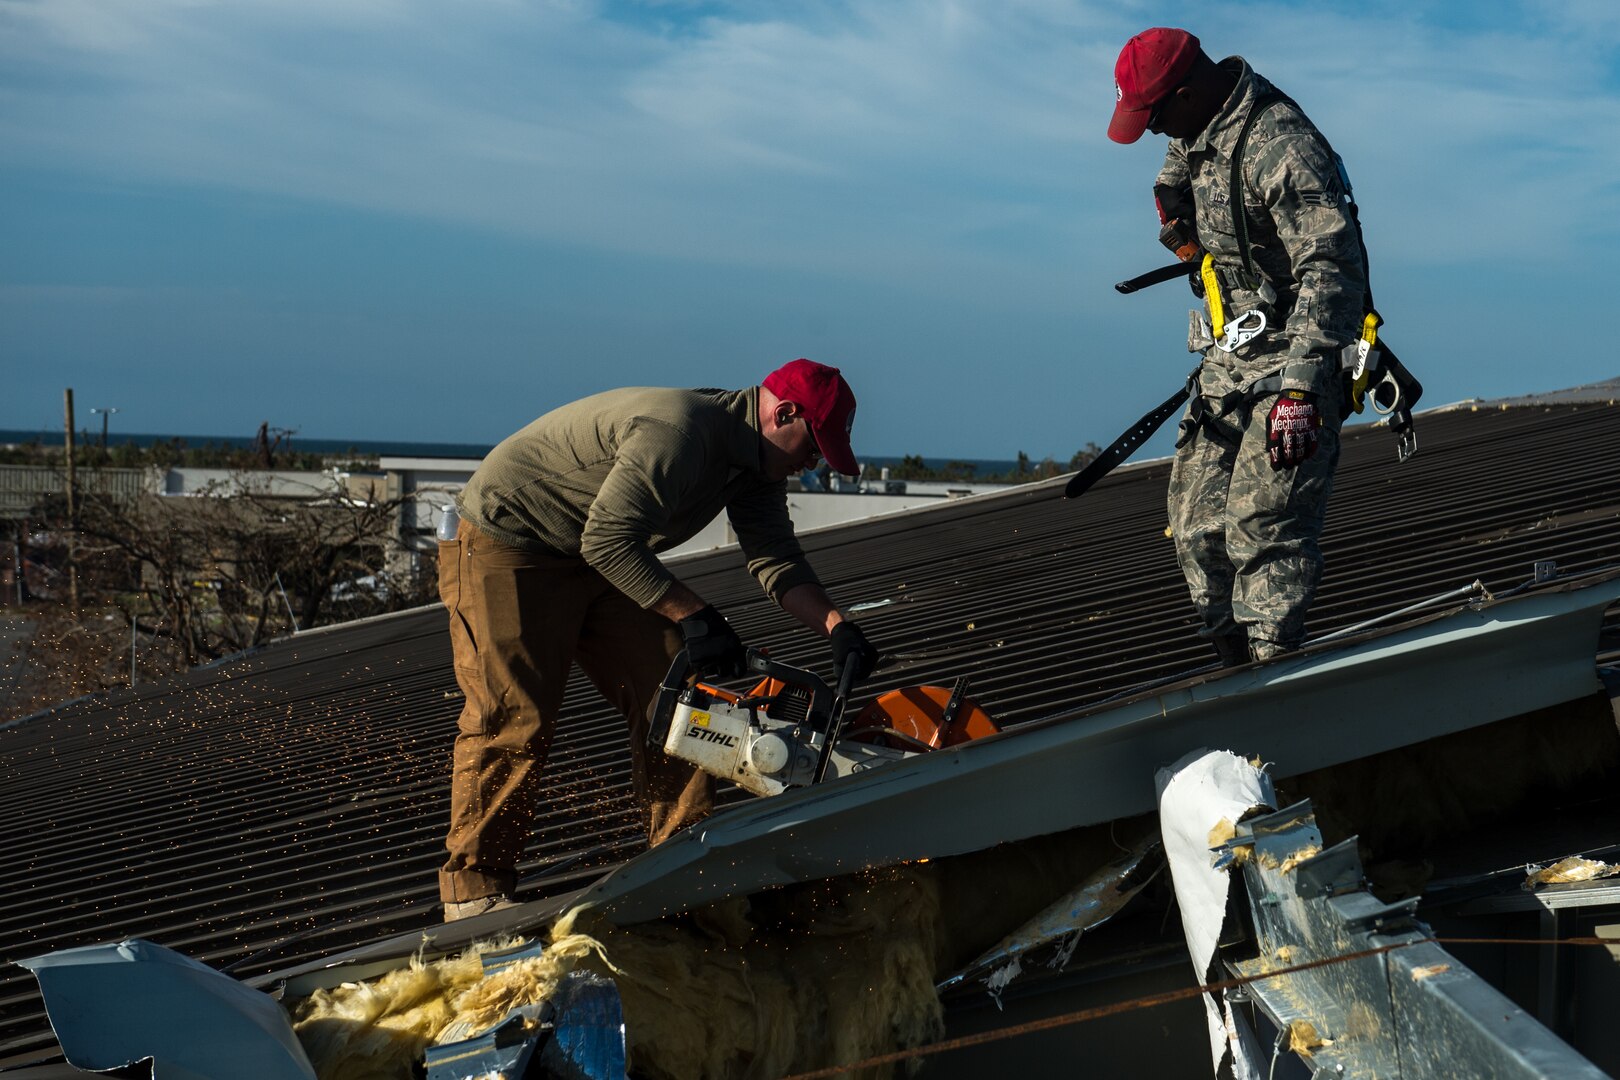 Airmen from 823rd RED HORSE Squadron at Hurlburt Field, Fla., perform structural repairs at the gas station Oct. 22 at Tyndall Air Force Base, Fla., after Hurricane Michael. Multiple major commands have mobilized relief assets in an effort to restore operations after the hurricane caused catastrophic damage to the base.